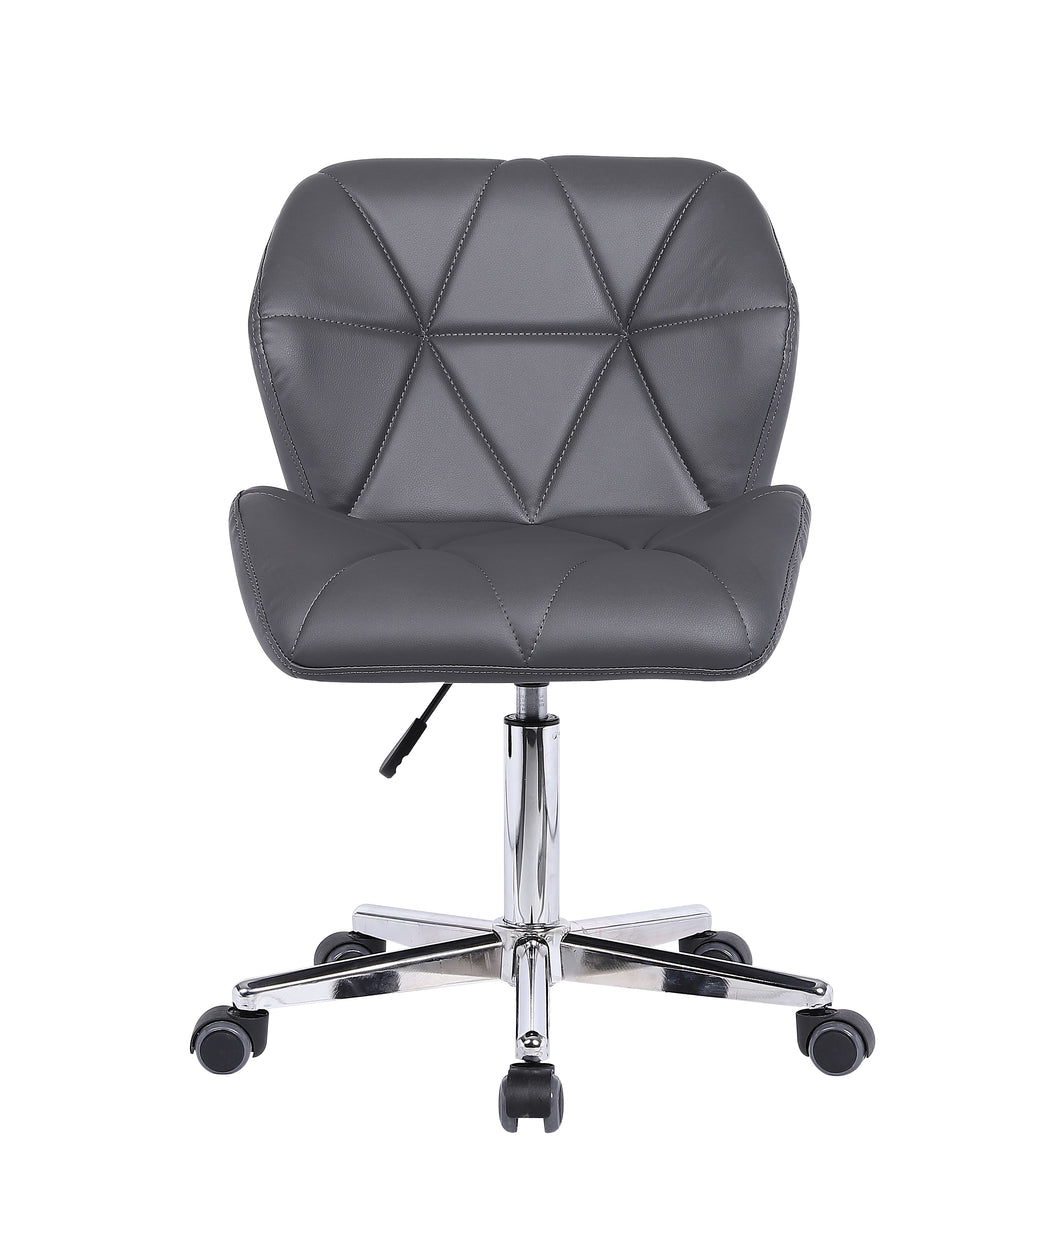 OFFICE SERIES/ 714G COMPUTER OFFICE CHAIR (GREY)